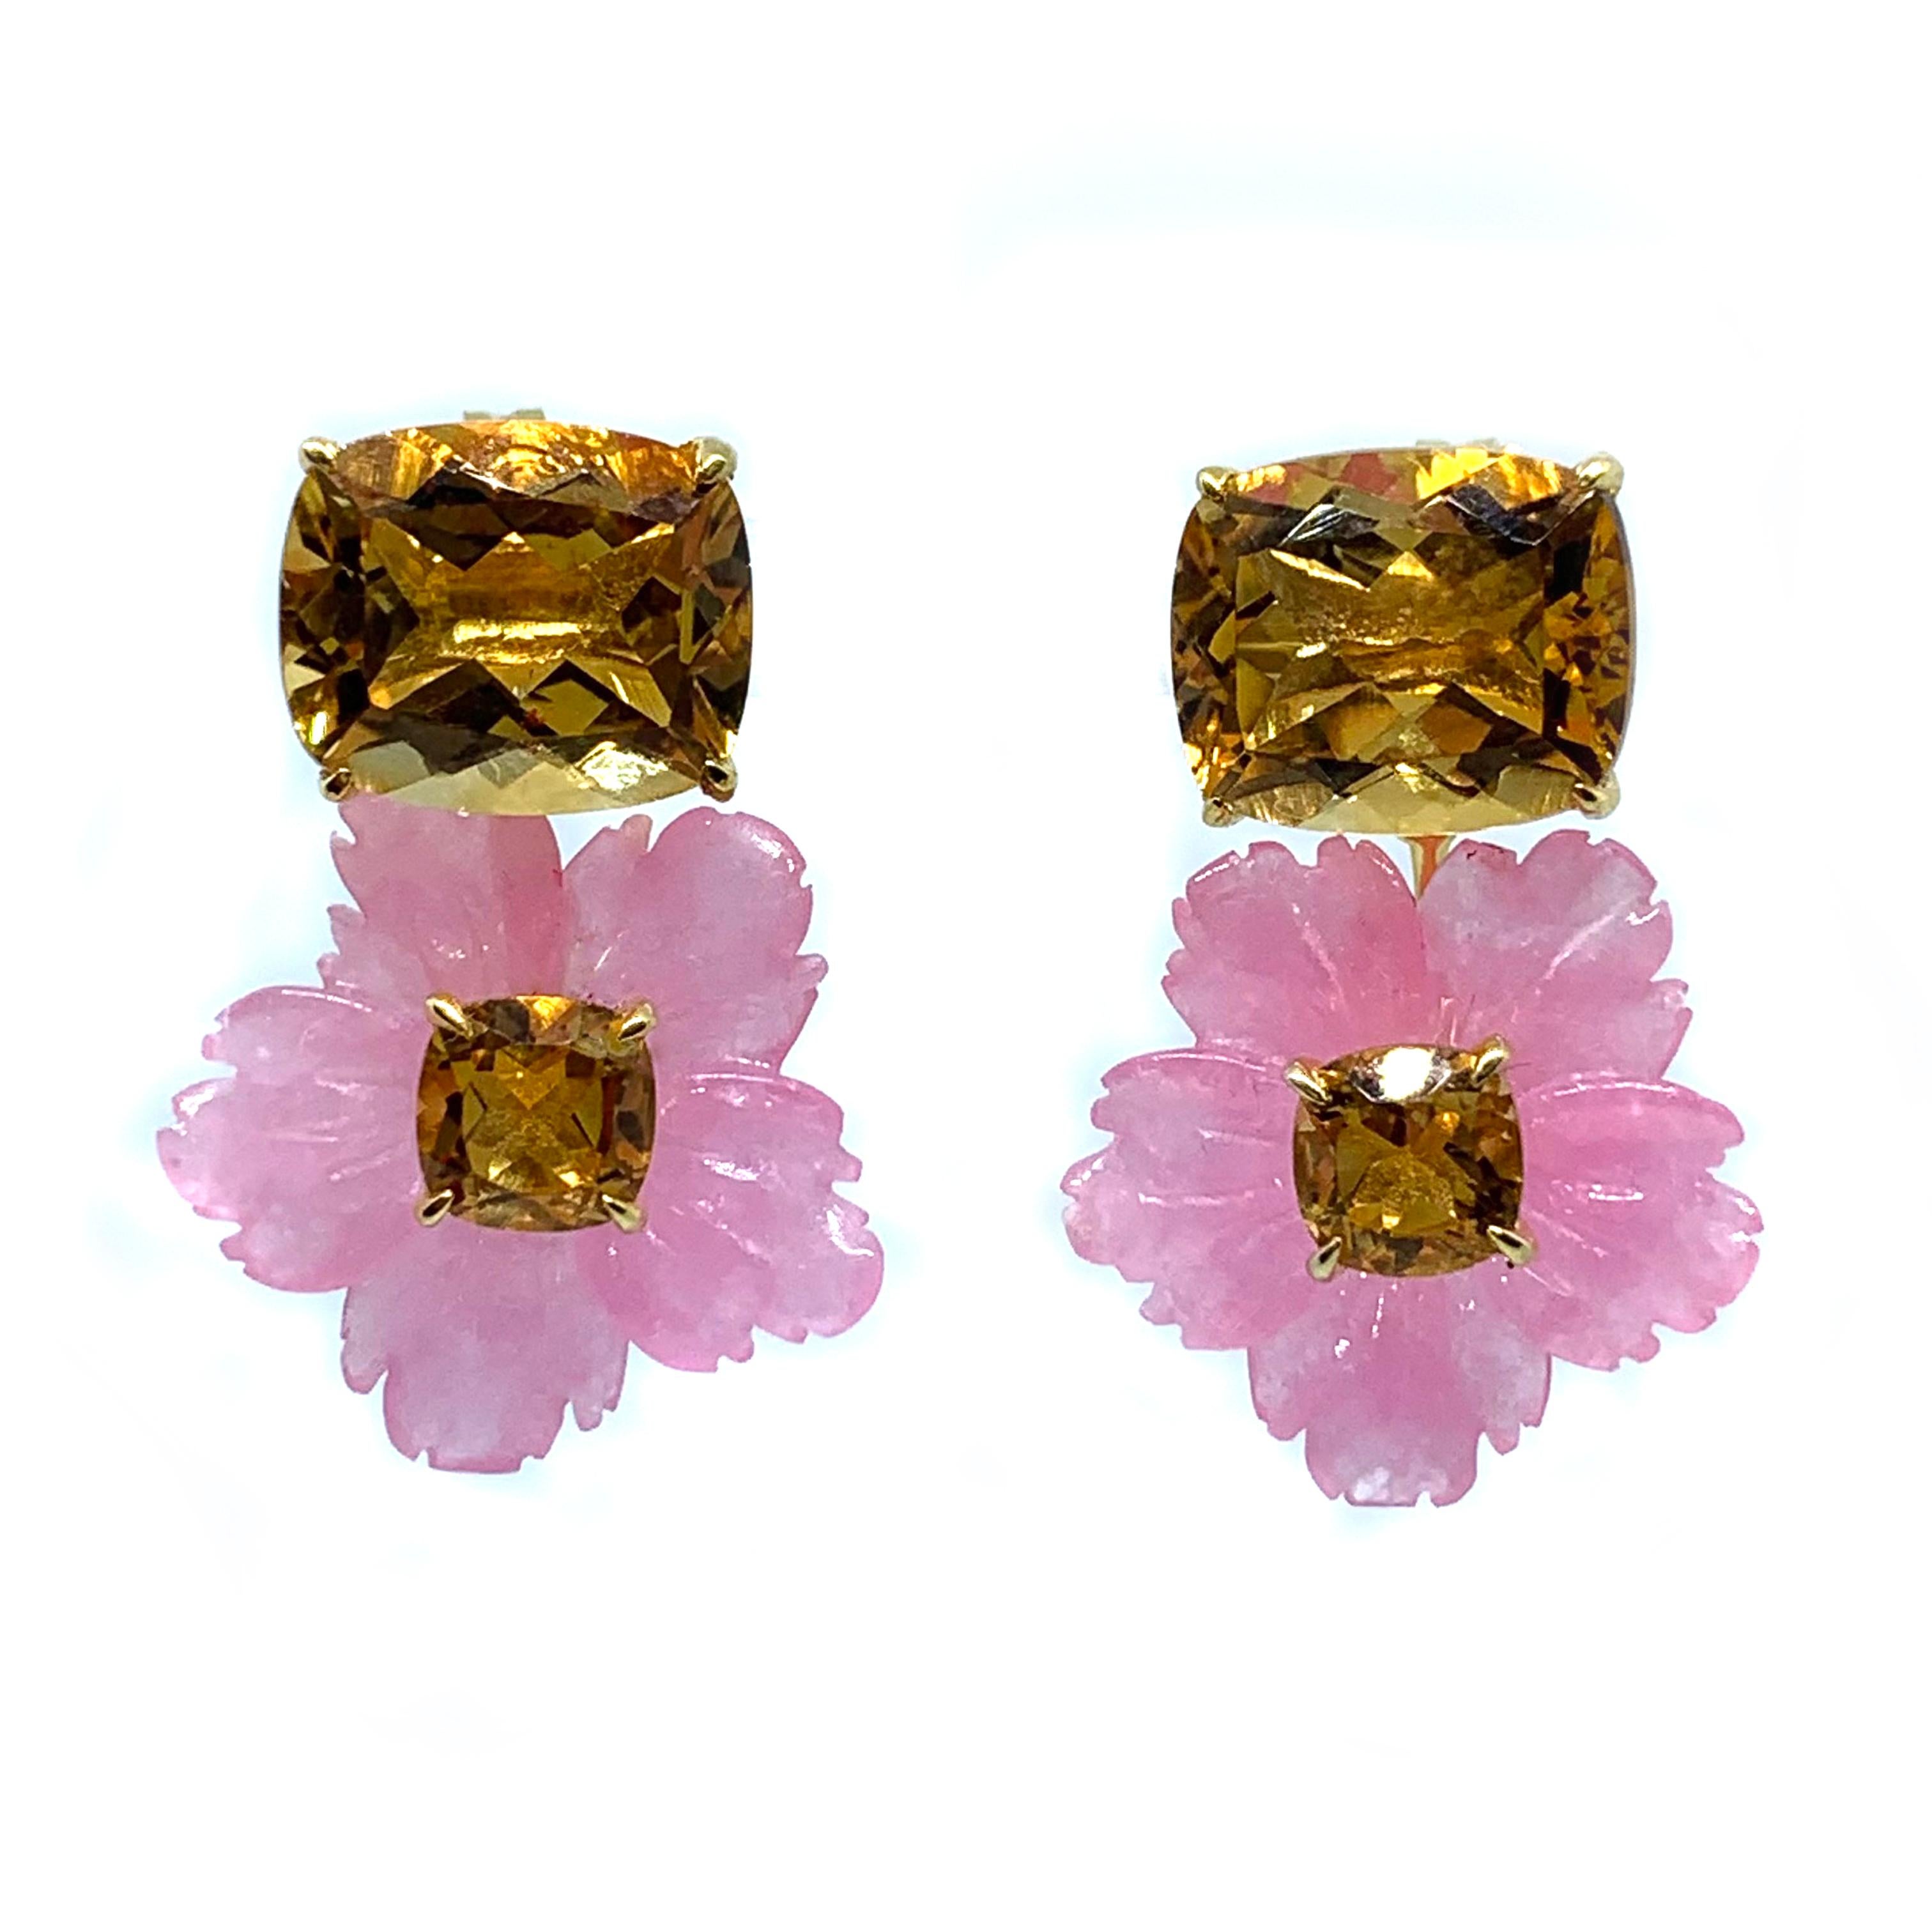 Bijoux Num's Cushion-cut Citrine and Carved Pink Quartzite Flower Drop Earrings

This gorgeous pair of earrings features beautiful cushion-cut yellow citrine,  18mm pink quartzite carved into beautiful three dimension flower with cushion-cut citrine